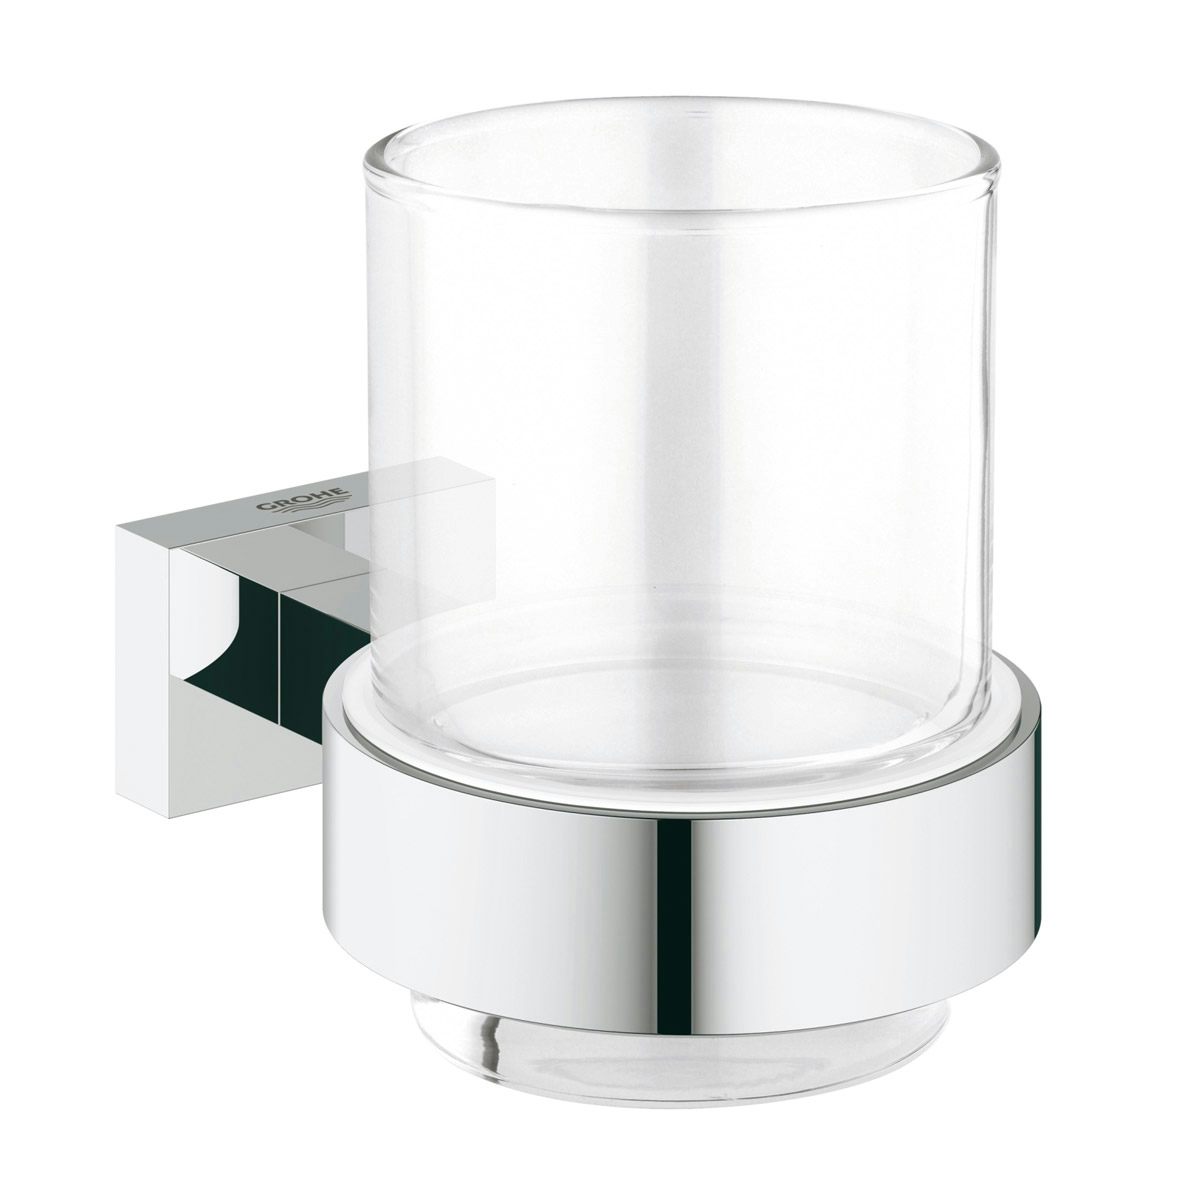 Grohe Essentials Cube tumbler and holder